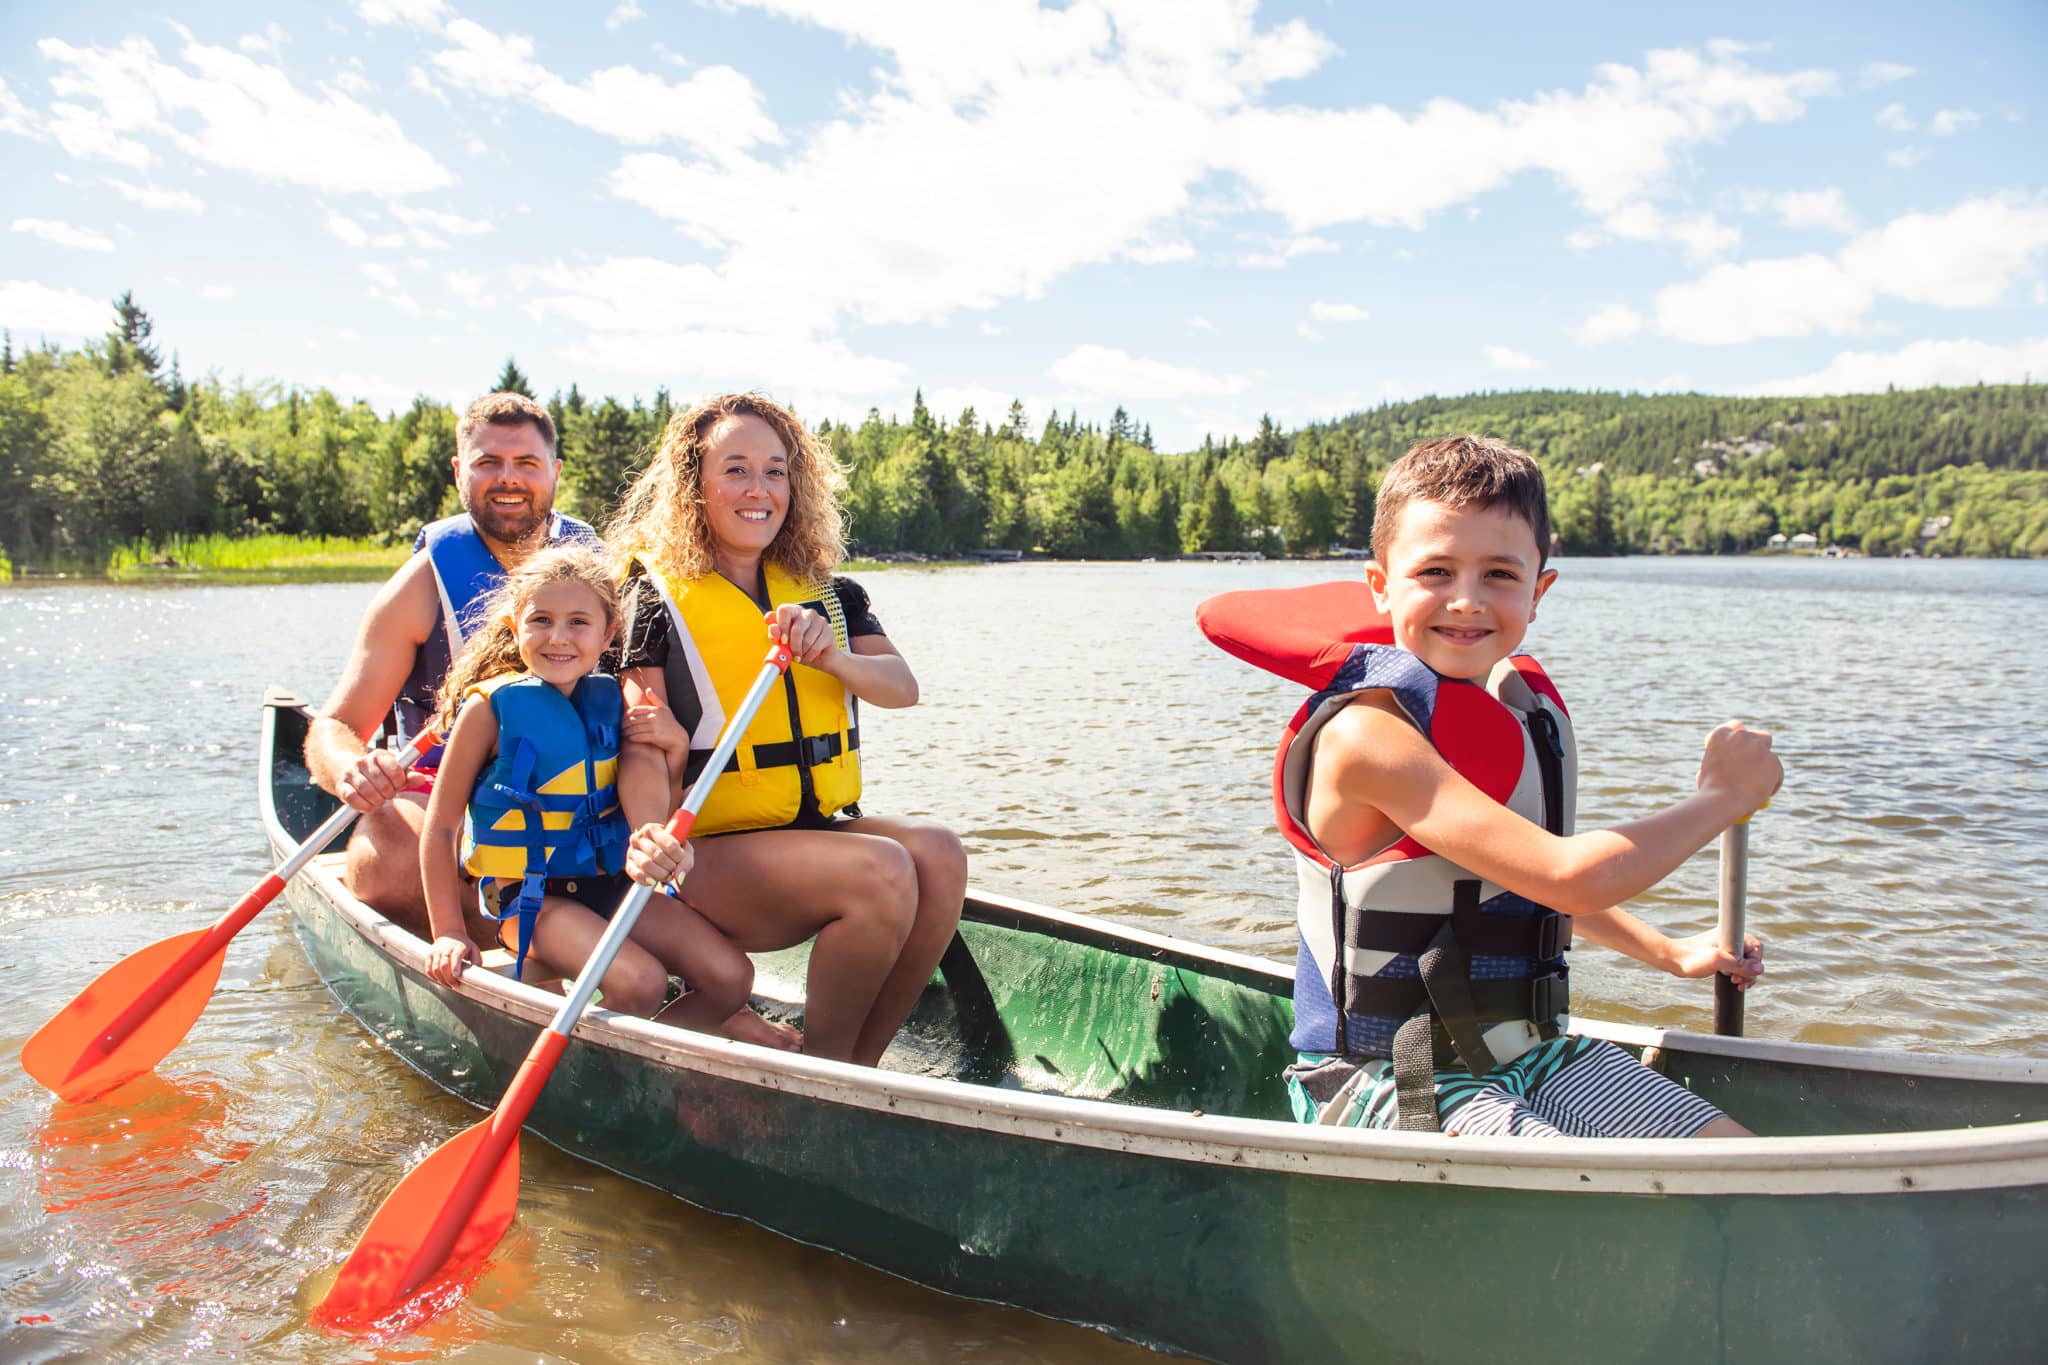 Family of four canoeing on lake for fun summer activity